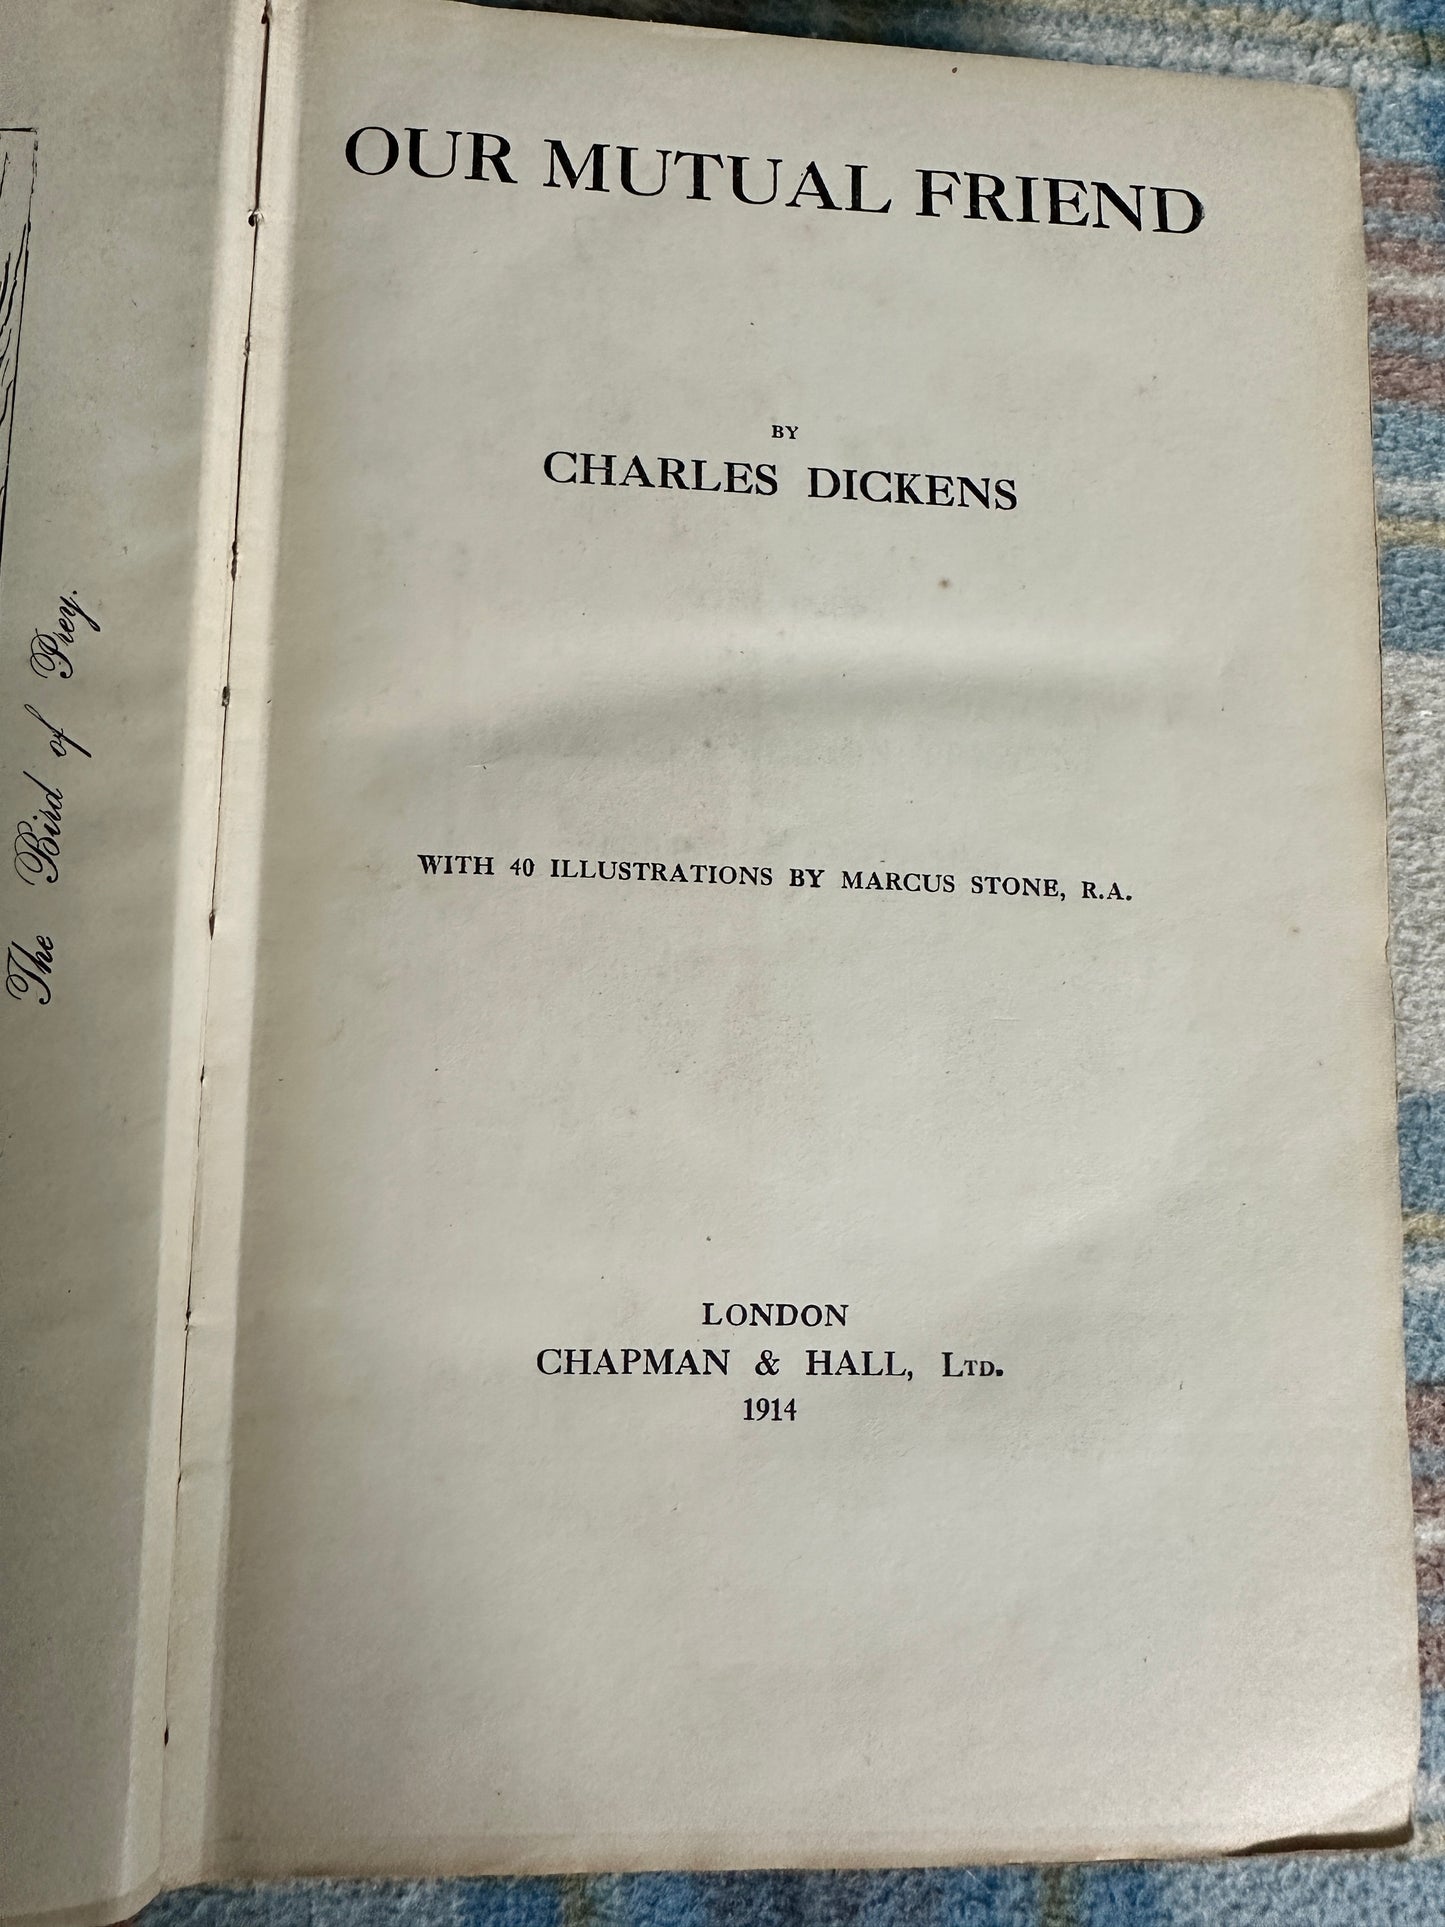 1914 Our Mutual Friend - Charles Dickens(Marcus Stone Illust)Chapman & Hall